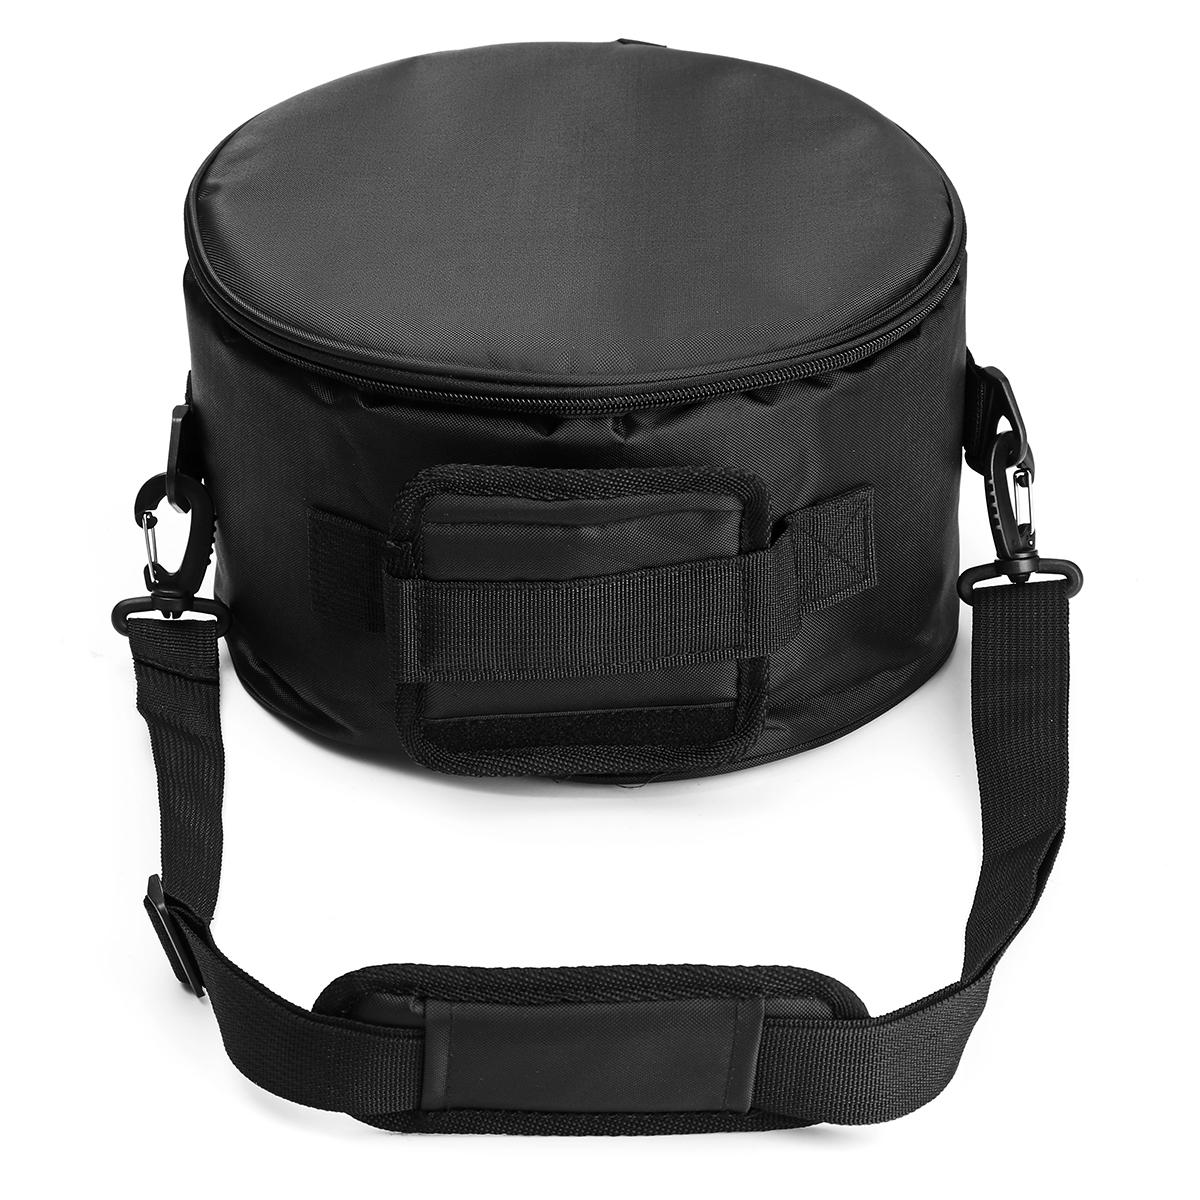 Steel Tongue Drum Bag Storage Punch Soulder Crossbody Bag For Outdoor Camping Leisure Wear